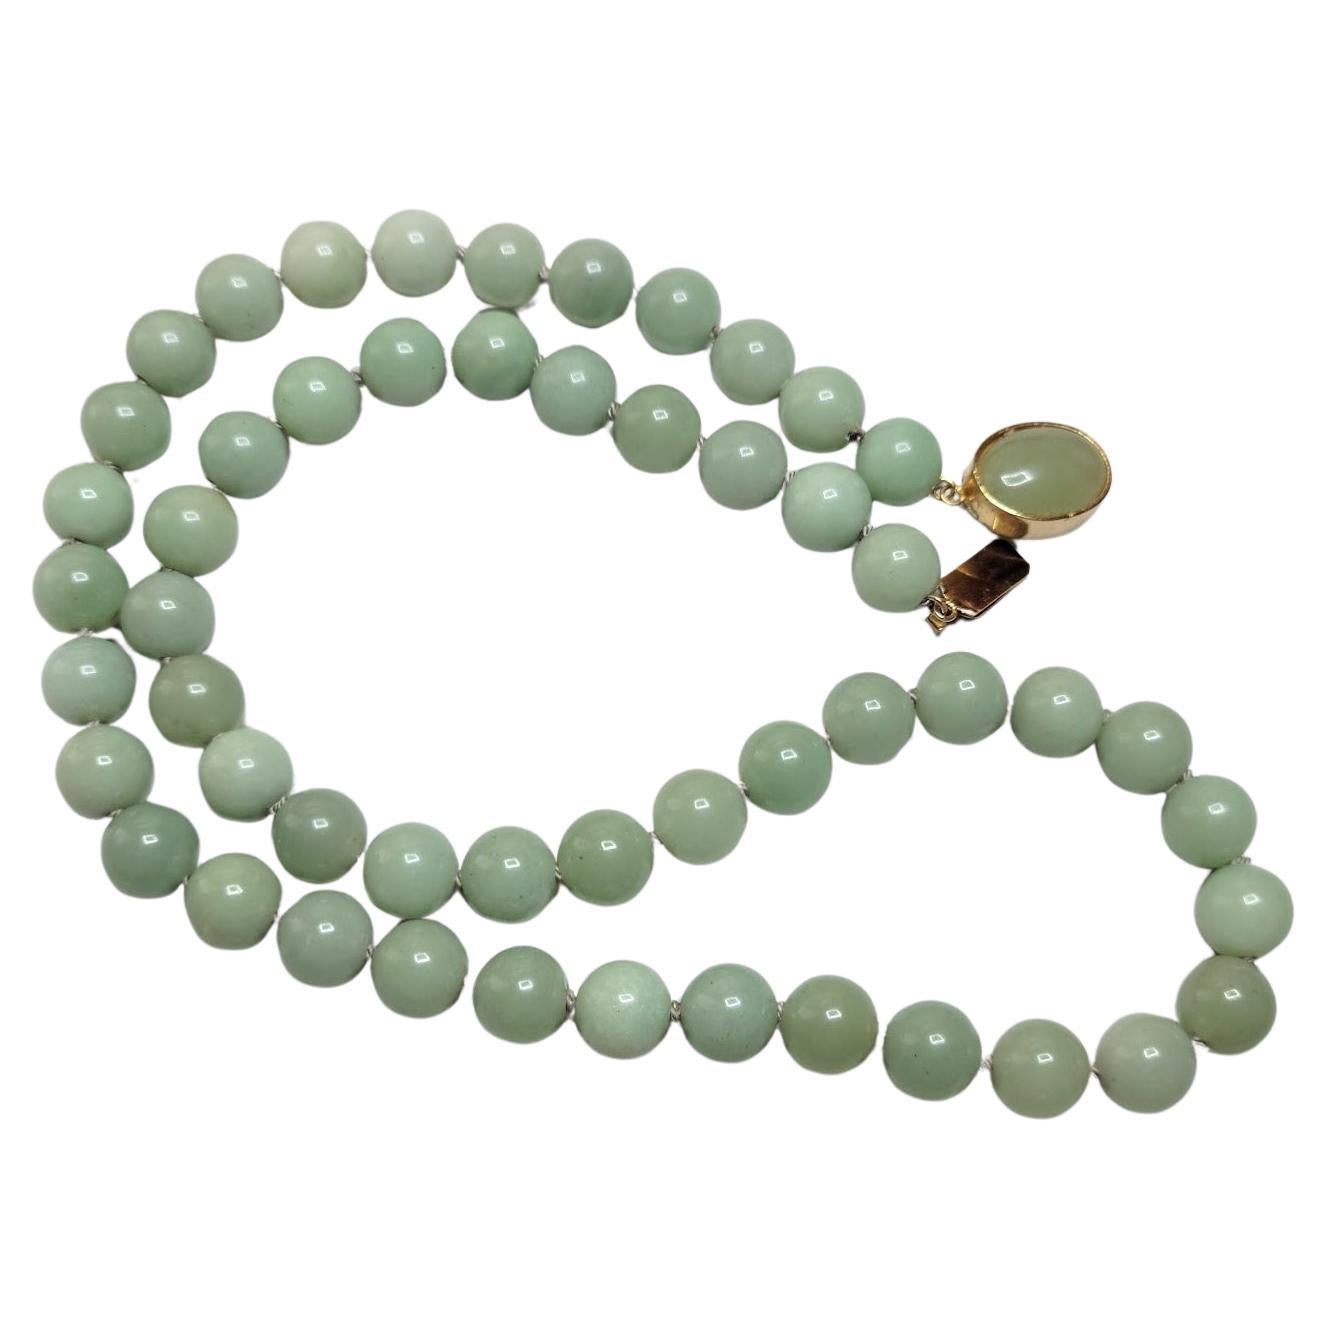 New Zealand Green Inanga Nephrite Necklace For Sale